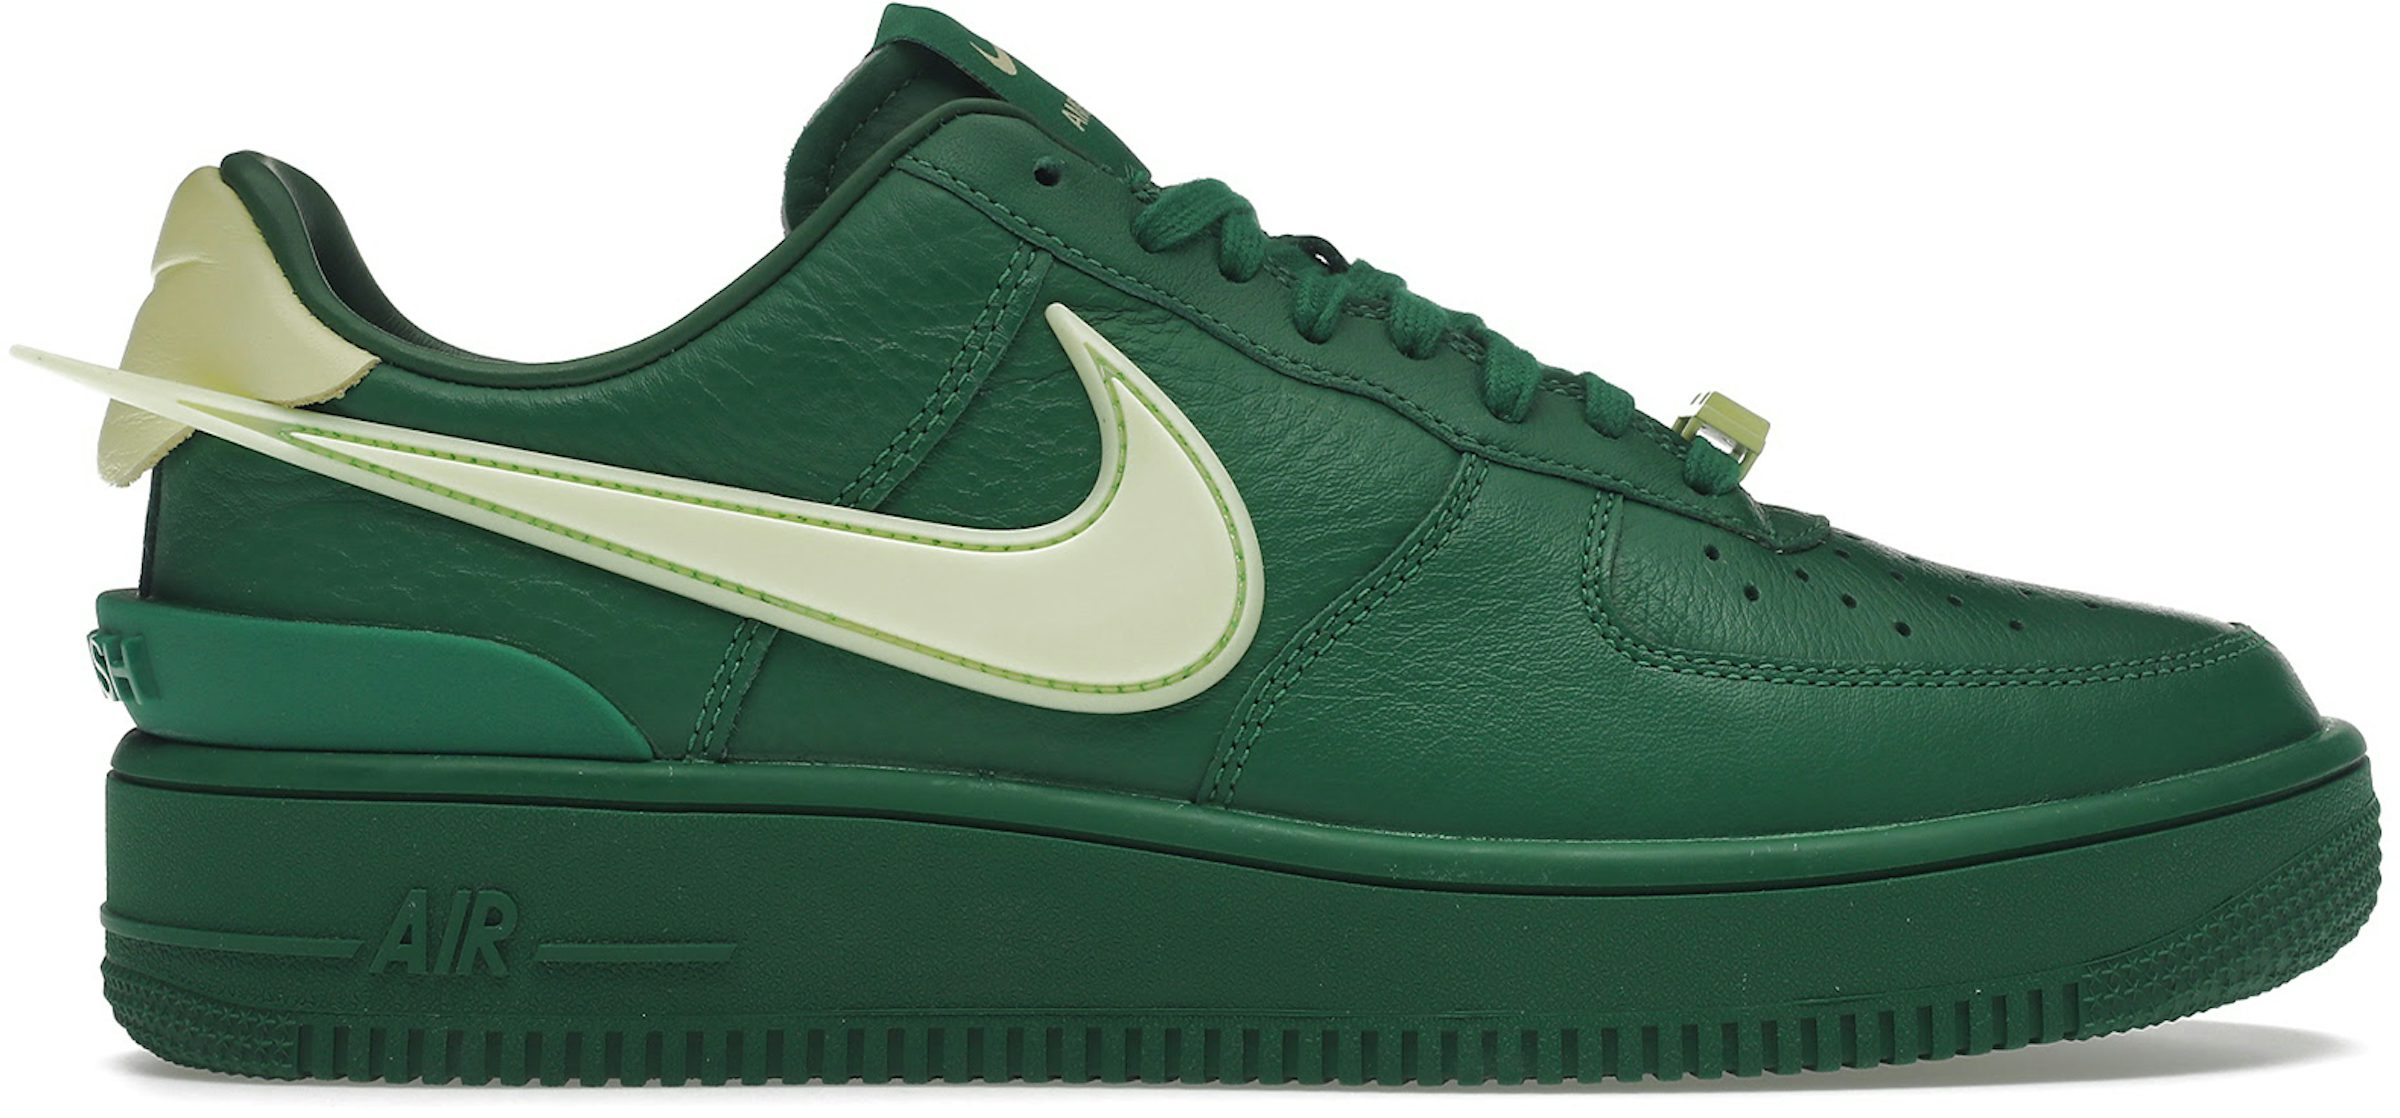 Travis Scott releases ultra-simple Utopia Nike Air Force 1 trainers for $150